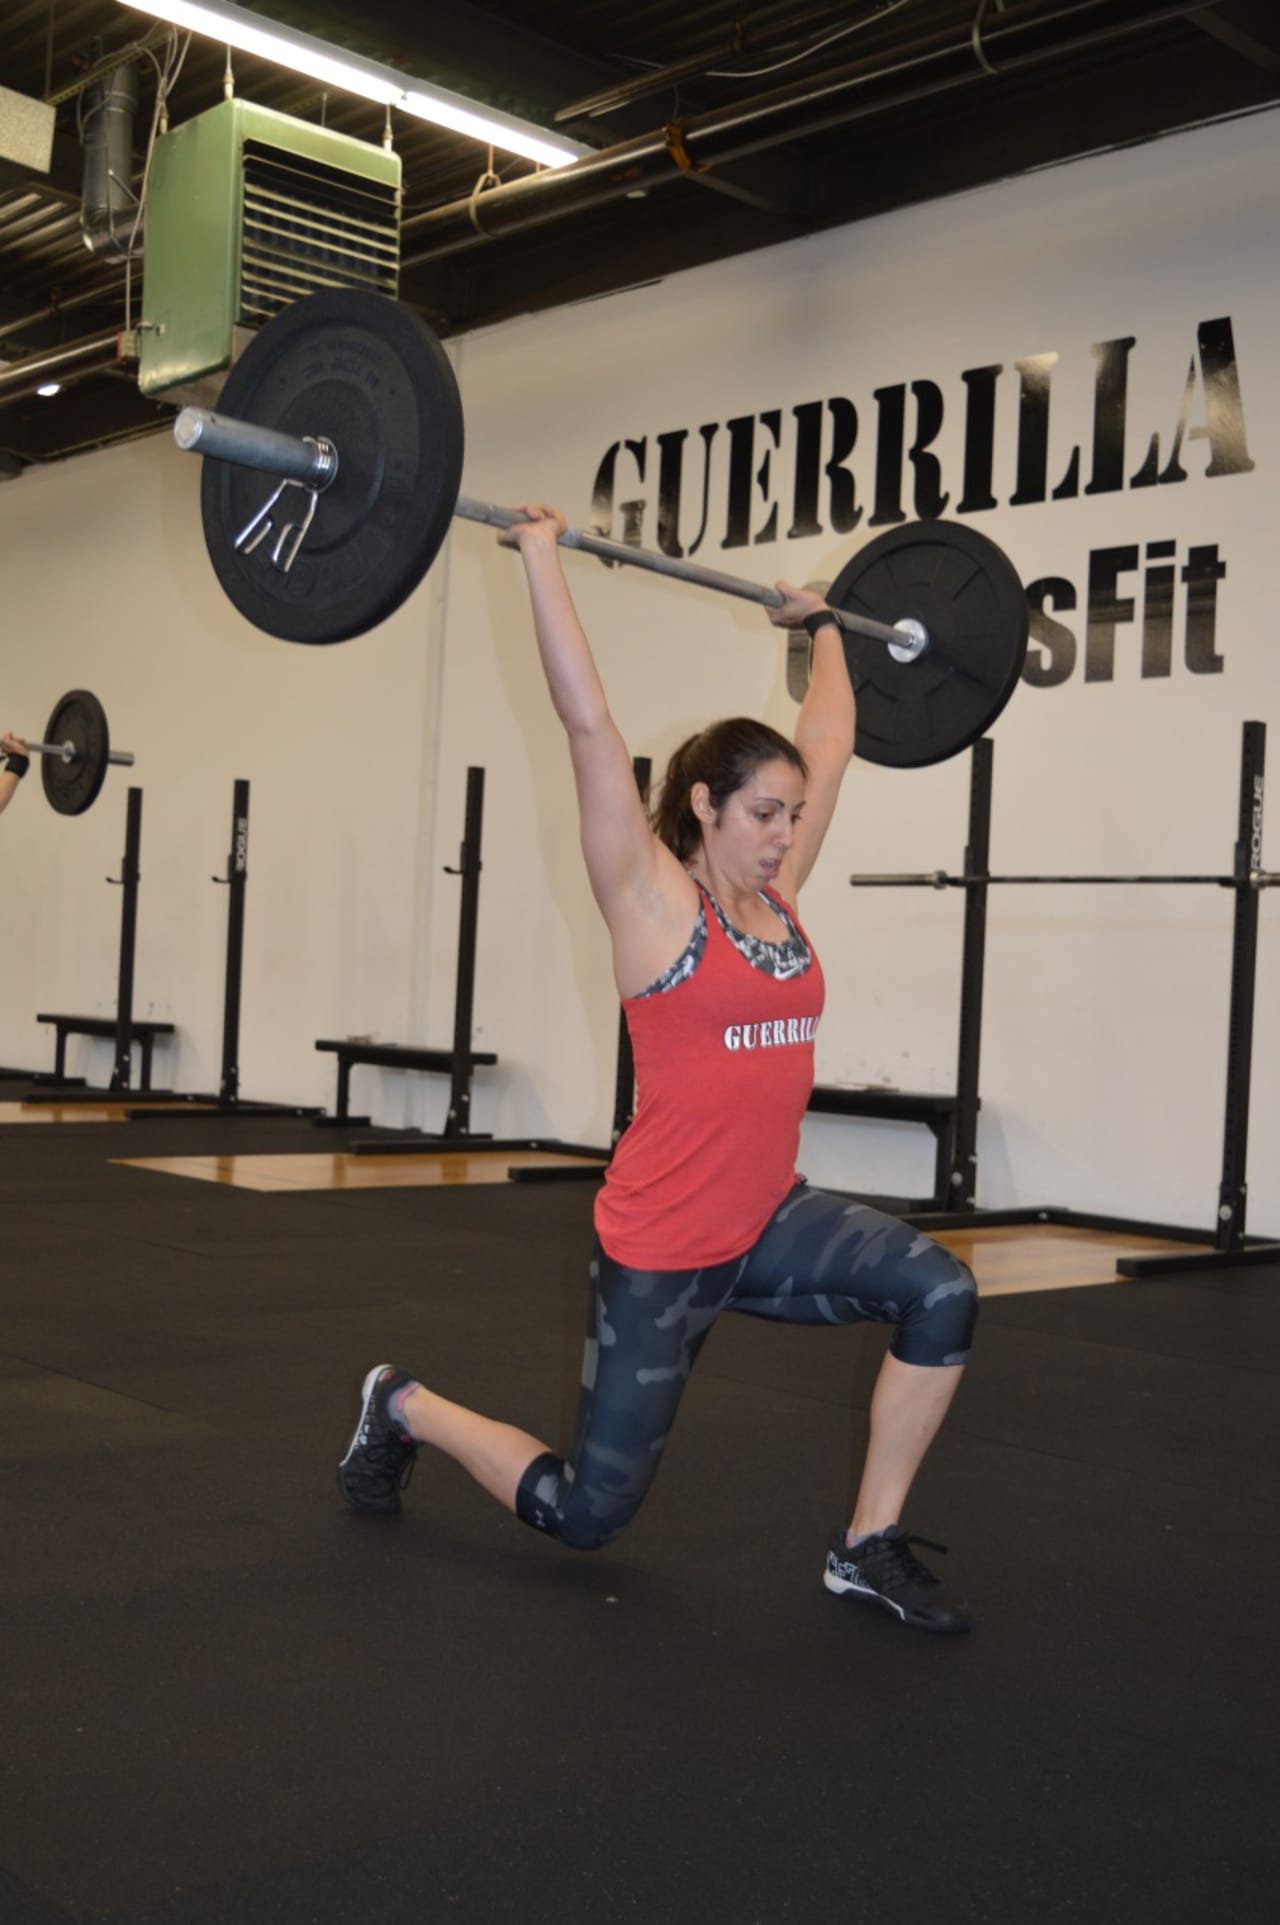 Dana Wilcomes, of Paramus, gets fit at Guerrilla Fitness.